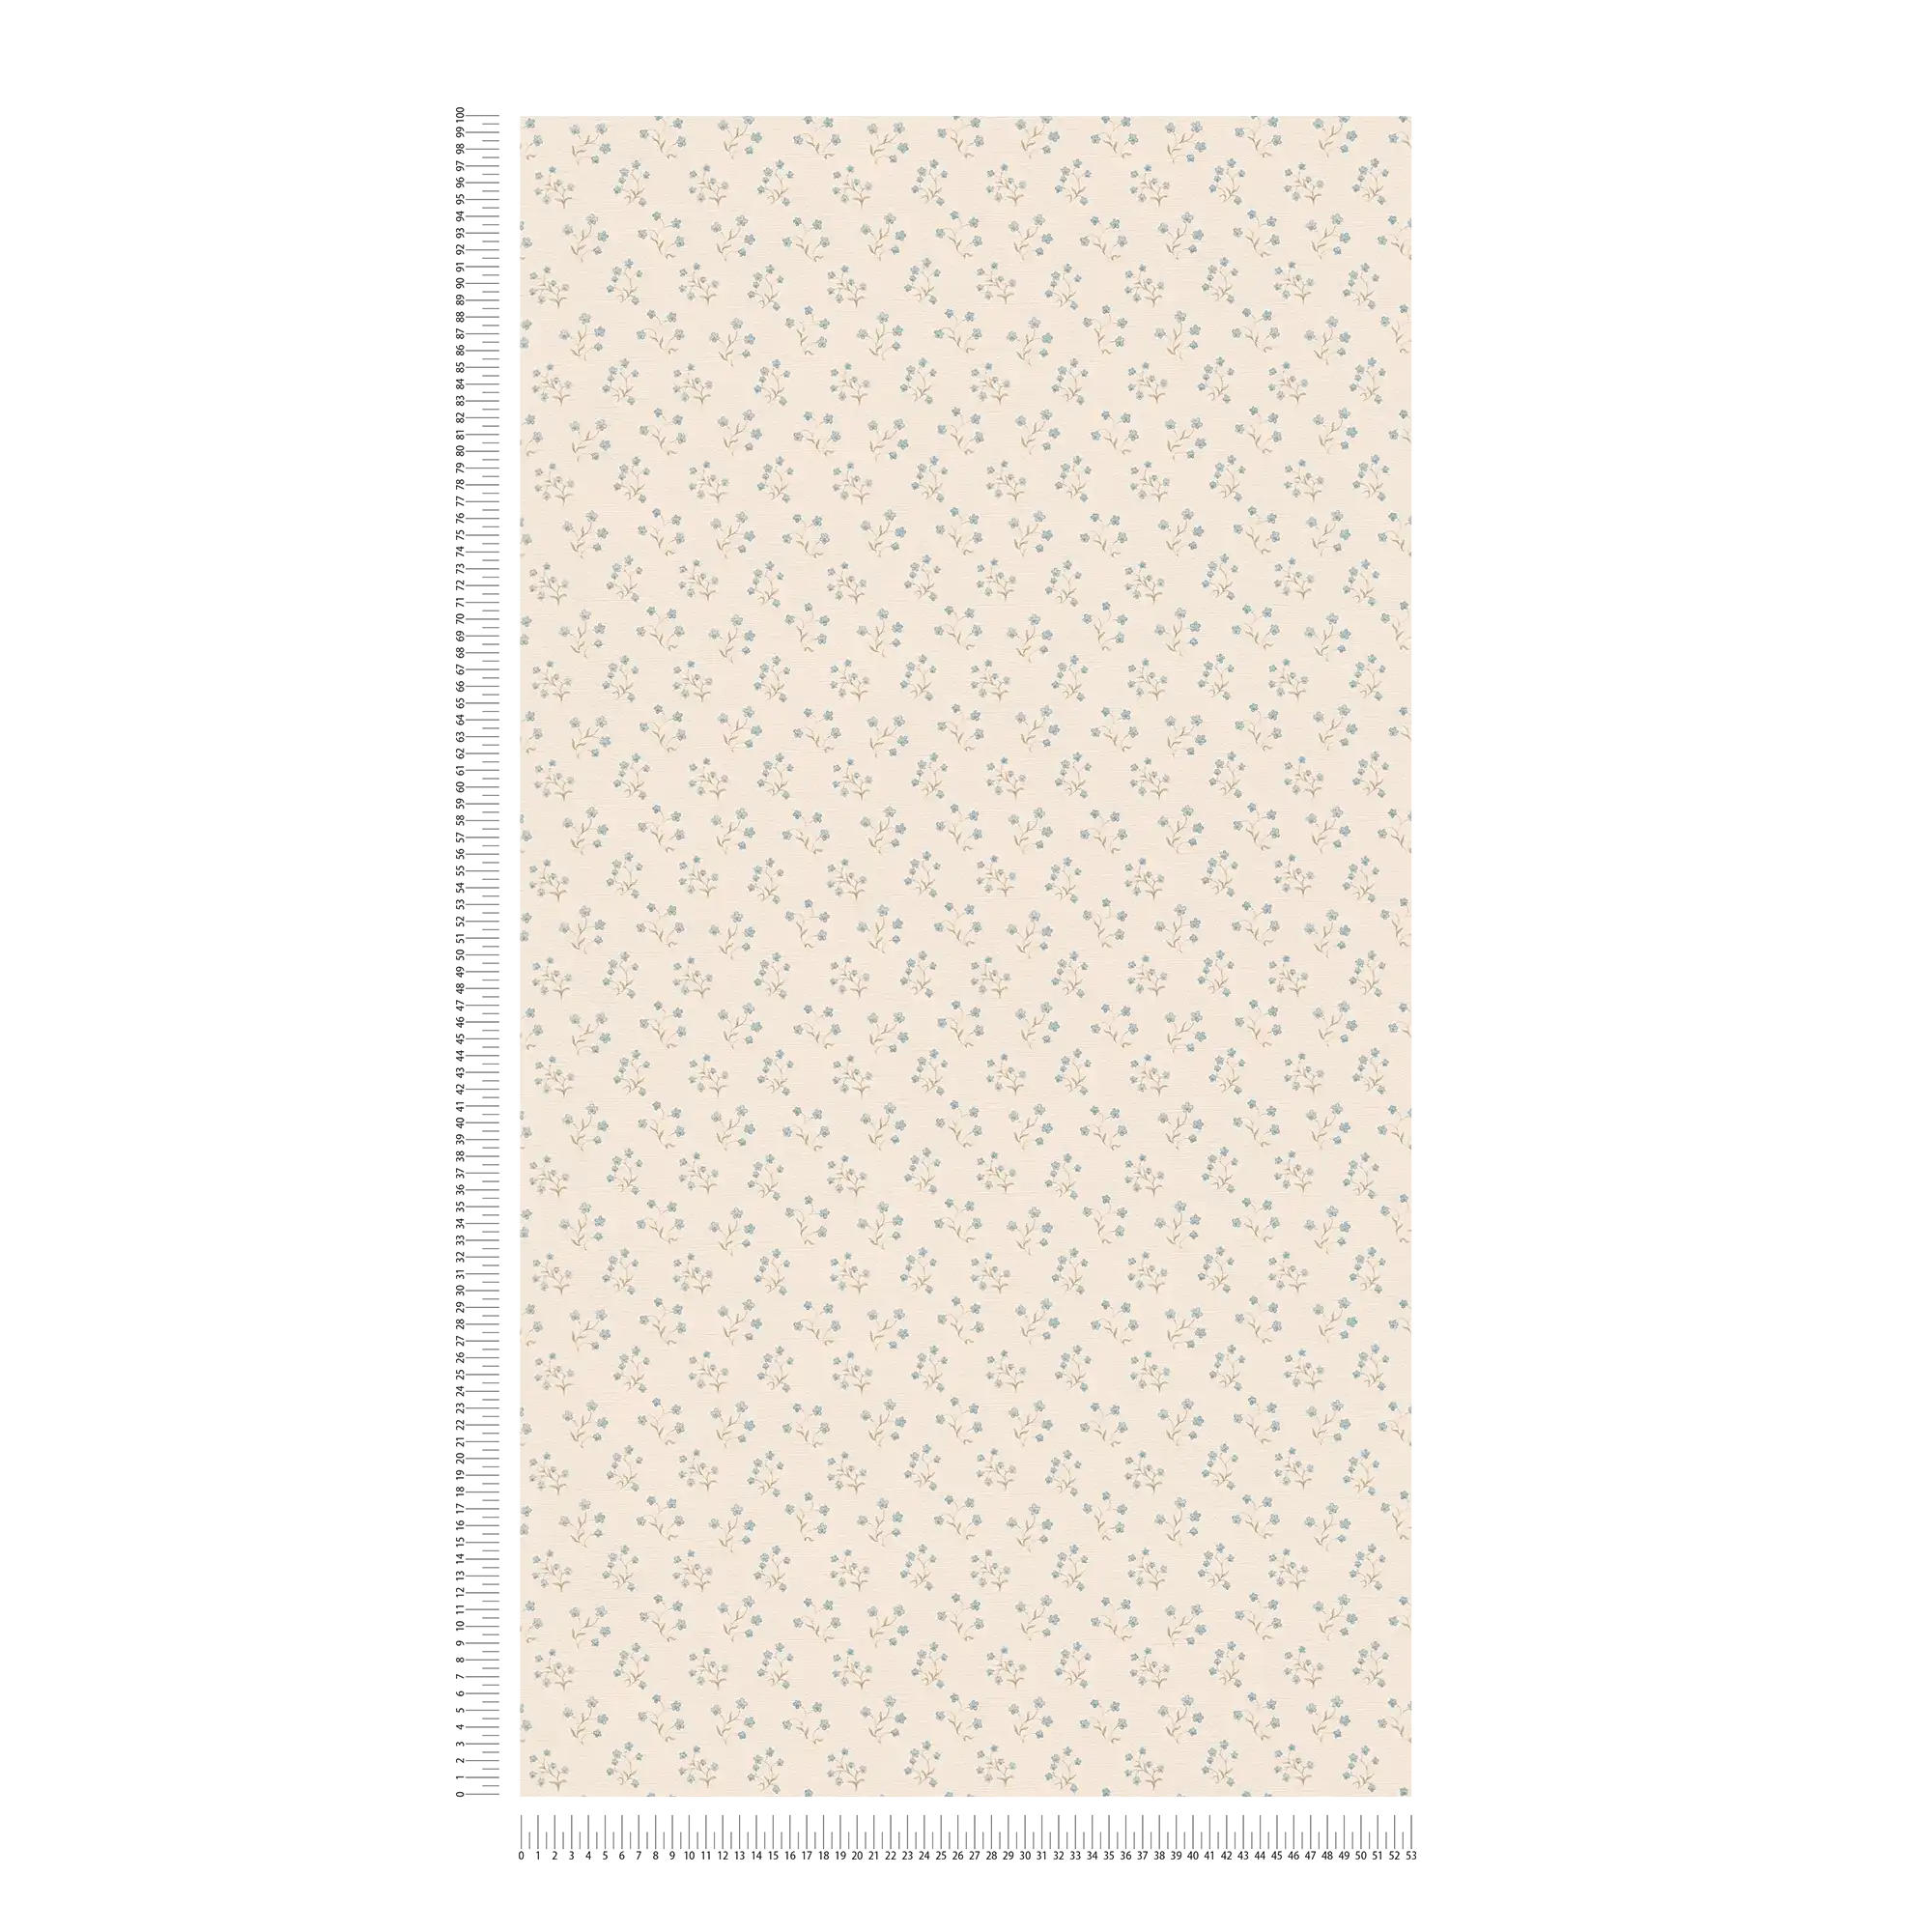             Floral wallpaper with small country house pattern - cream, blue, grey
        